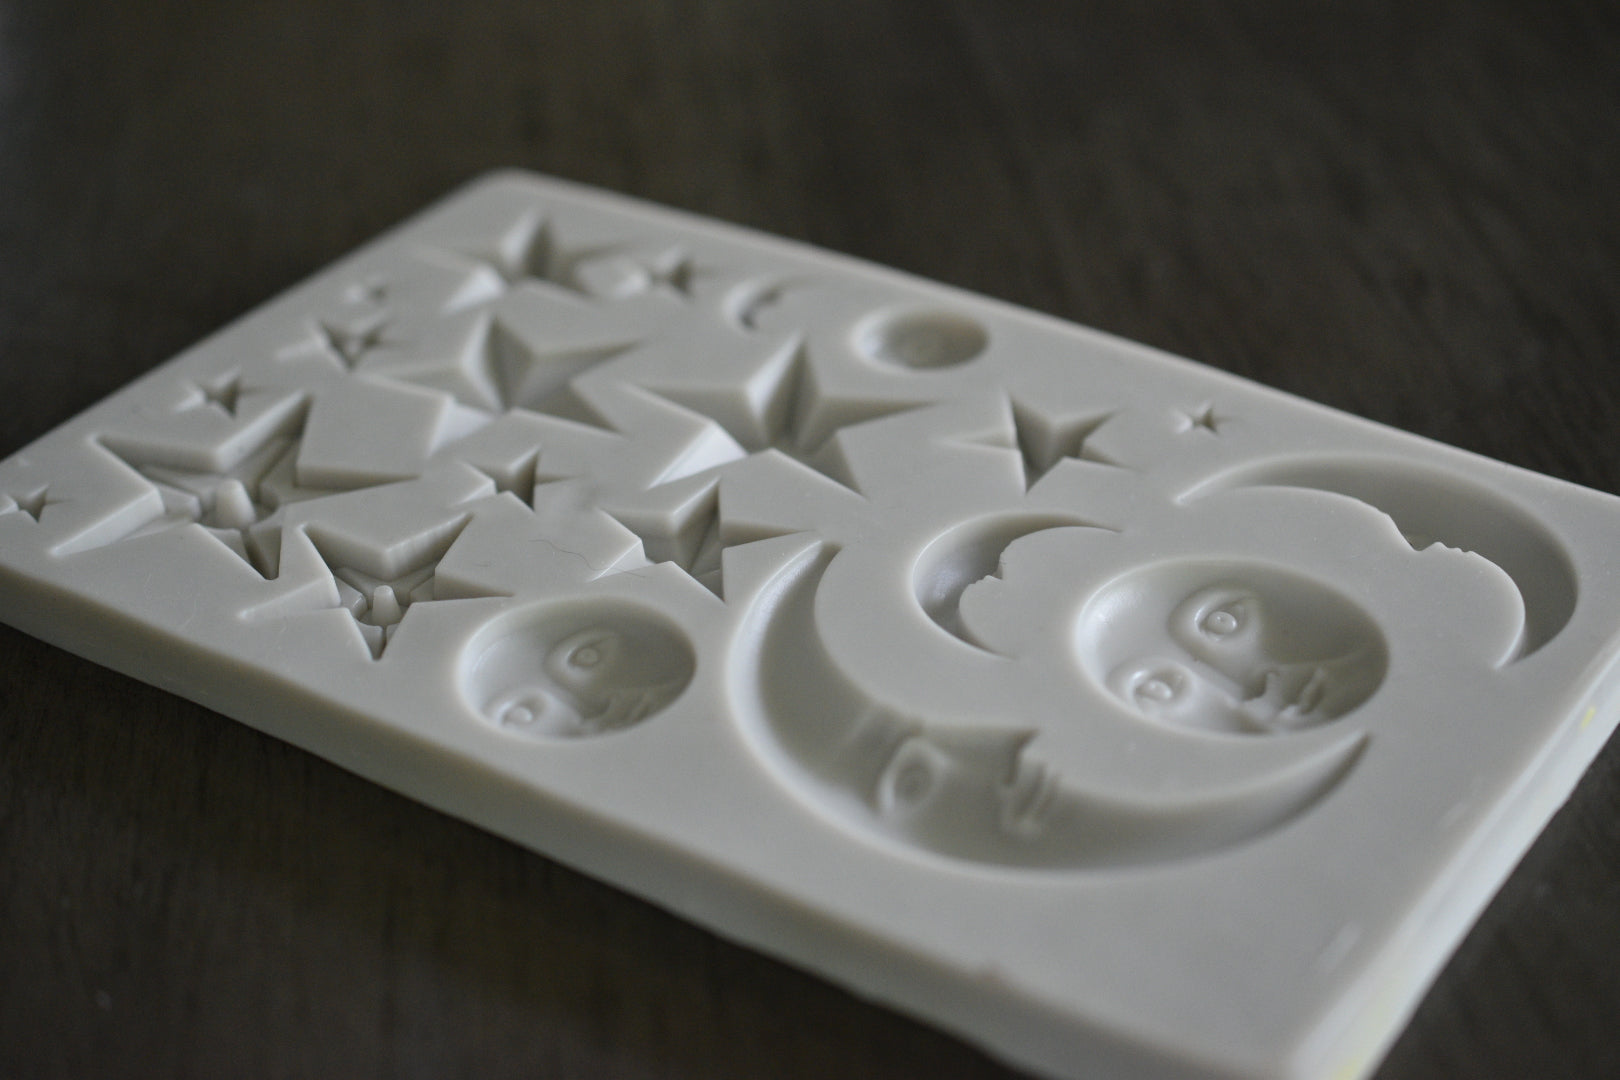 A close up view of the celestial mold. The mold shows small moons and stars, some with stoic faces on them. The mold is grey.